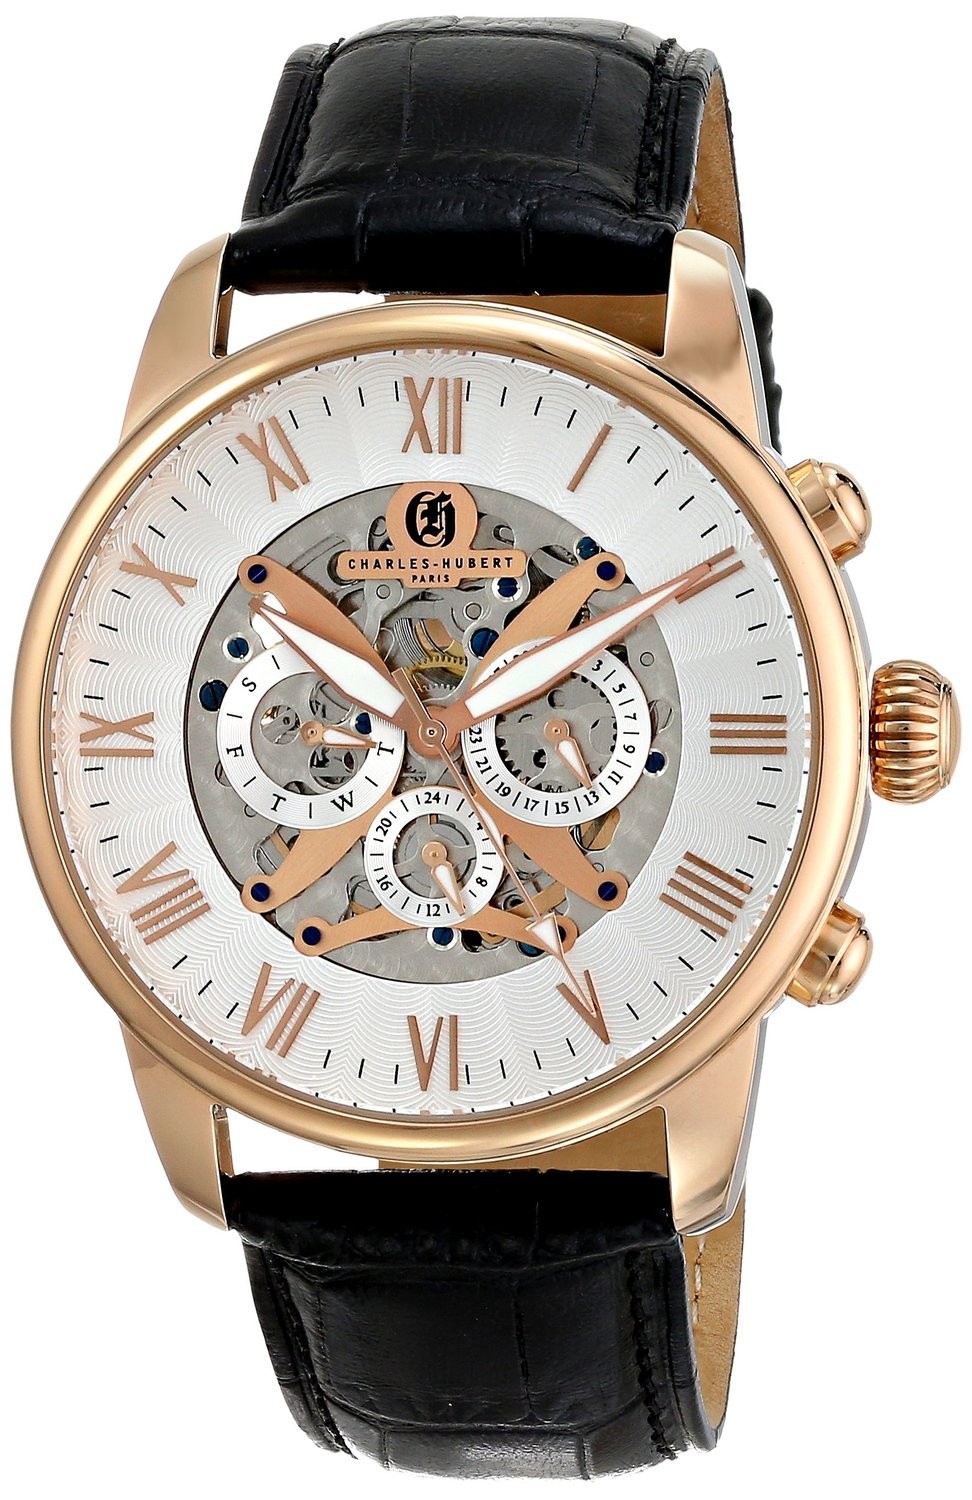 Charles-Hubert Paris Men's Rose-Gold Plated Stainless Steel Multifunction Automatic Watch